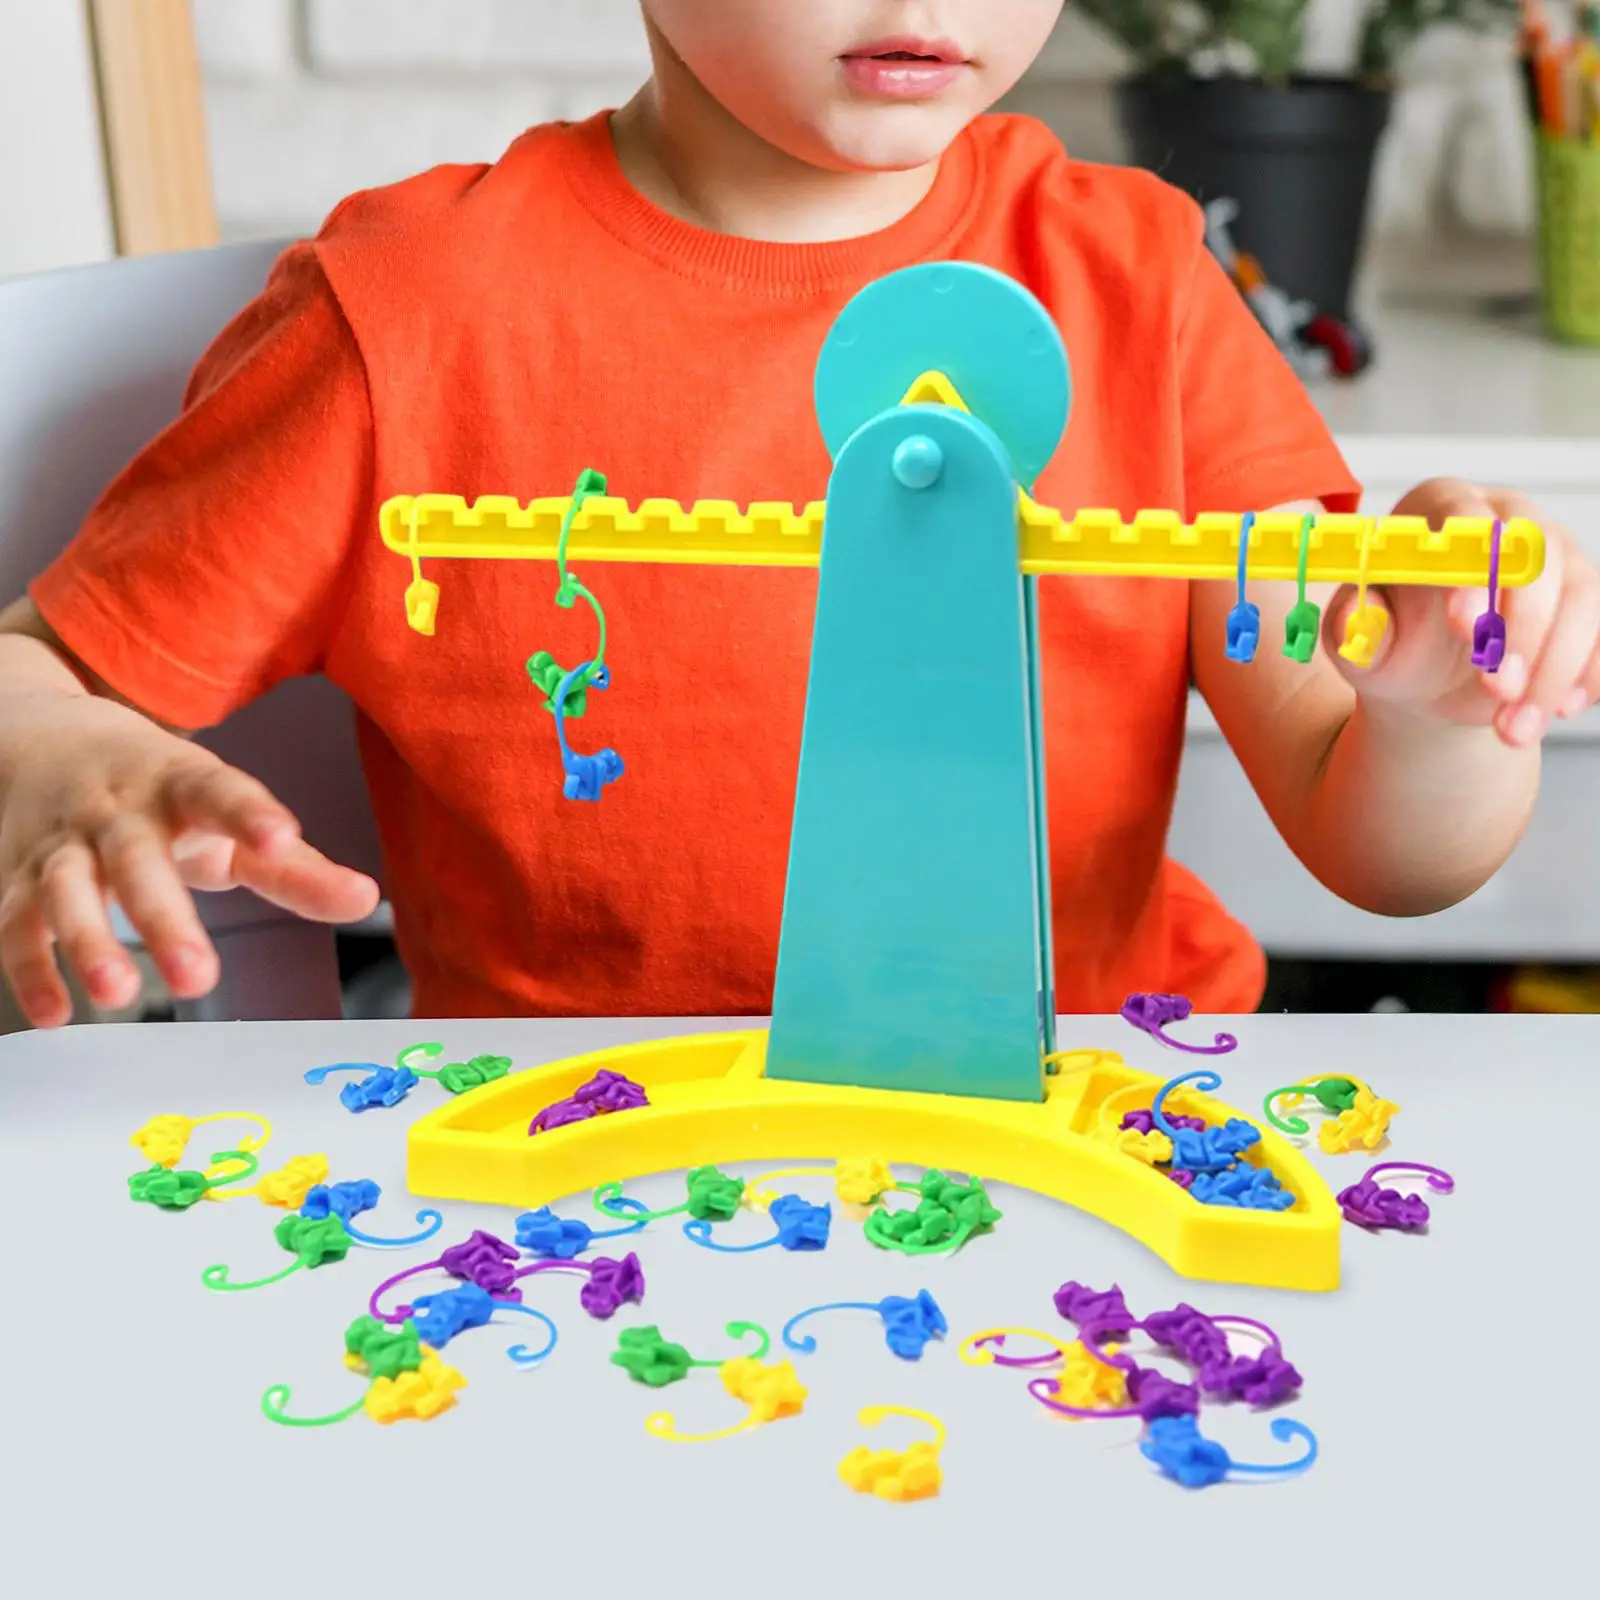 Monkey Balance Counting Toys Educational Monkey Scale Math Toy for Interaction Teaching Tool Props Fine Motor Skills Cooperation